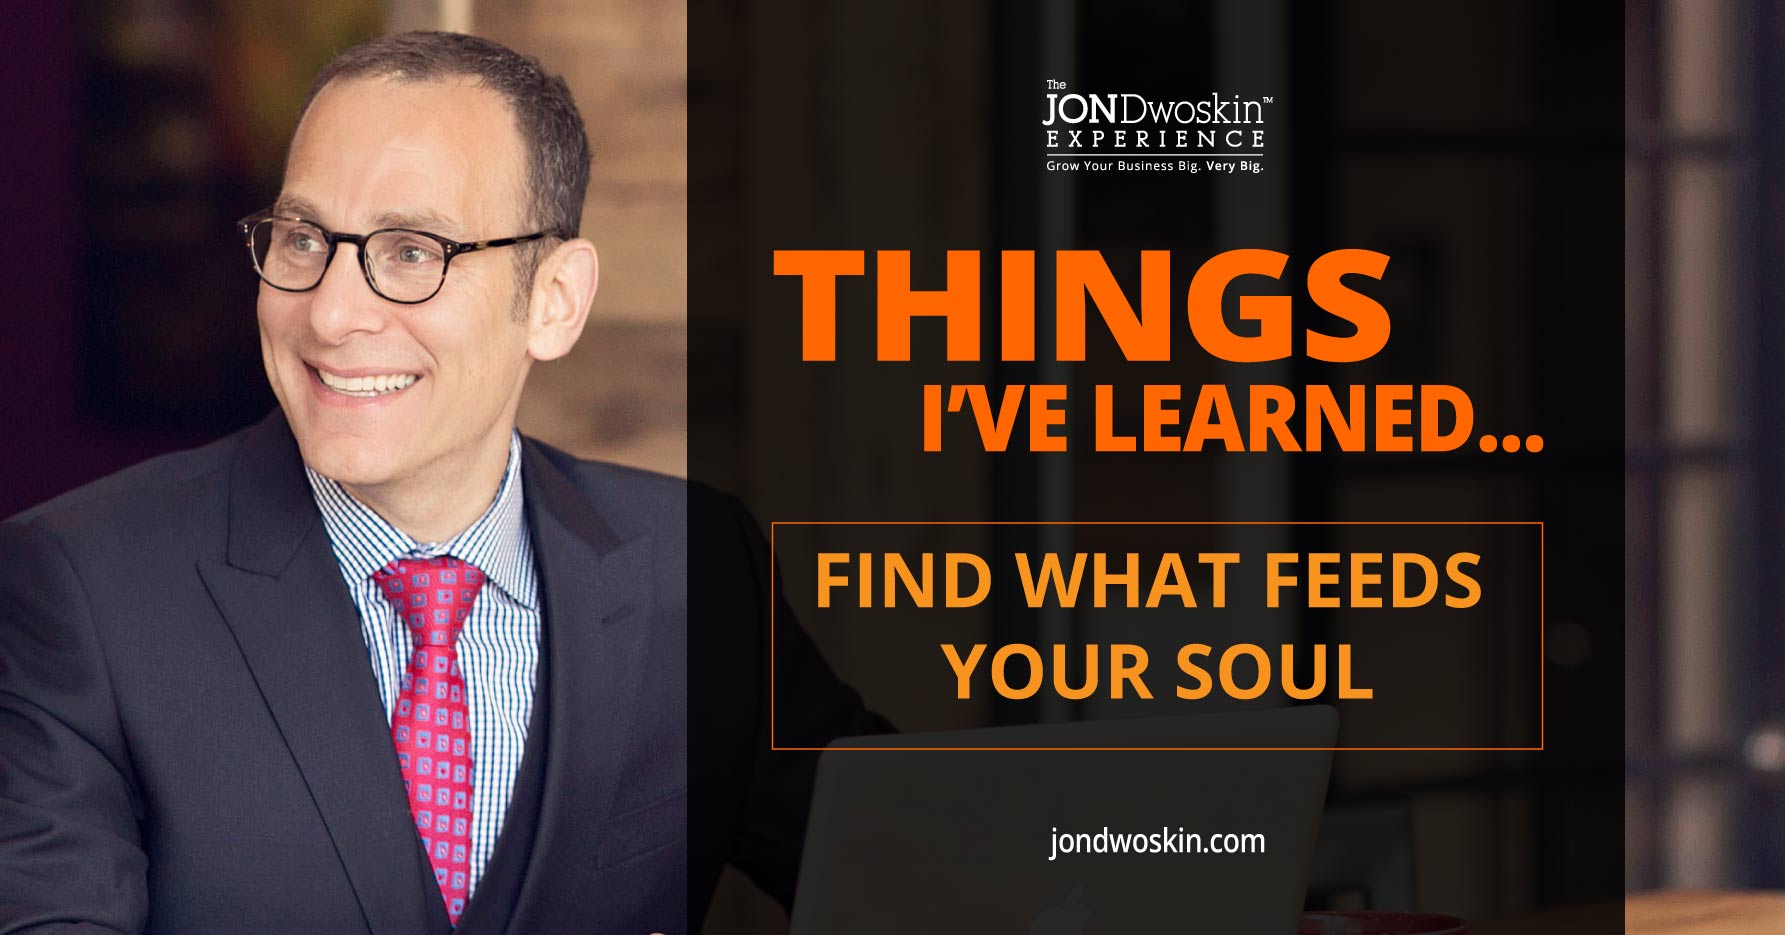 5 Things I’ve Learned in My 50 Years: Find What Feeds Your Soul